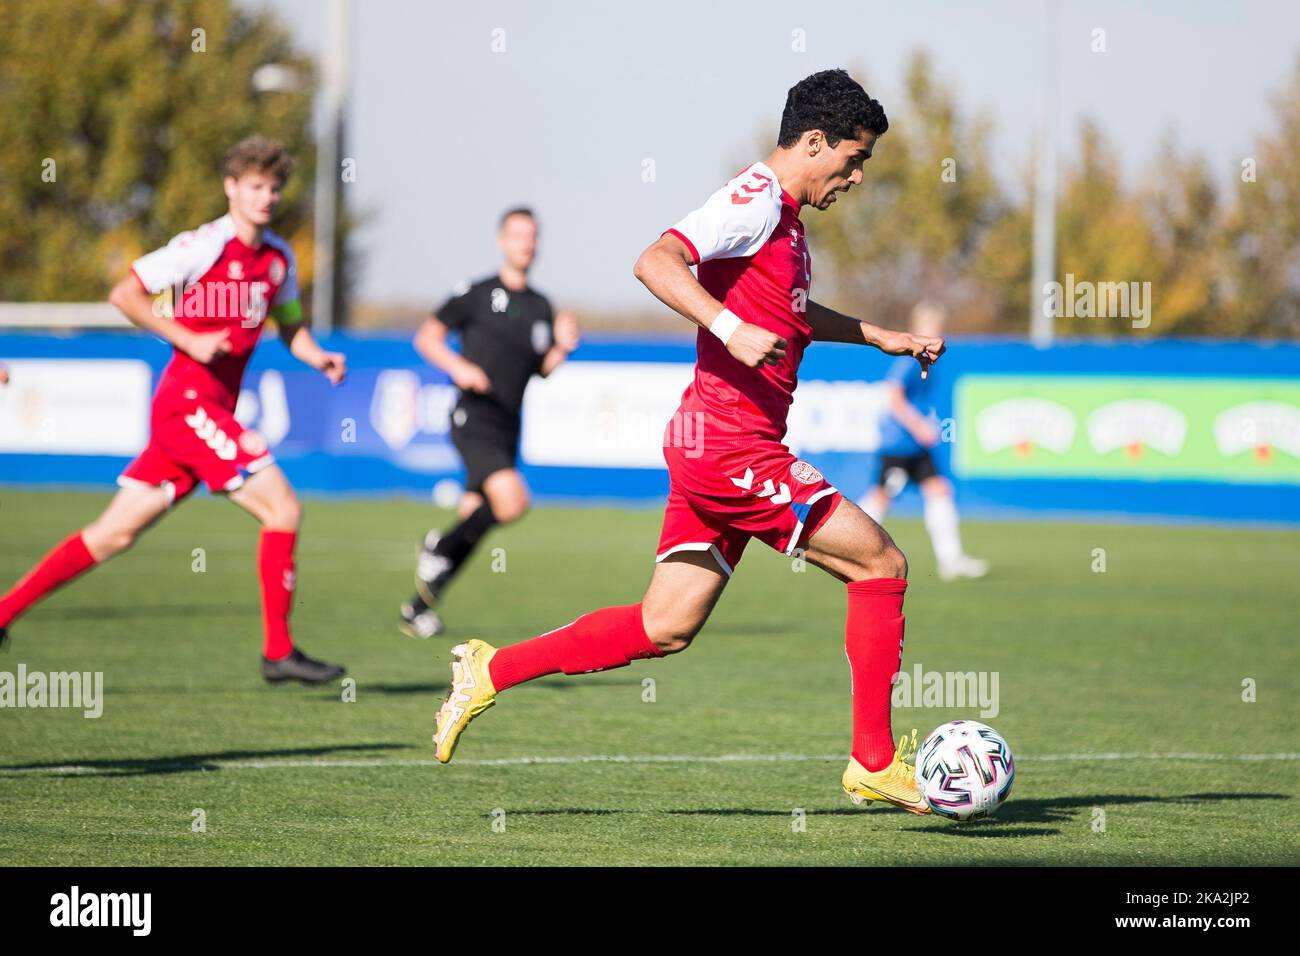 Buftea, Romania, 29th October 2022. Anders Nosche of Denmark drives to the goal during the UEFA Under-17 Men European Championship Qualifier match between Denmark and Estonia at Football Centre FRF in Buftea, Romania. October 29, 2022. Credit: Nikola Krstic/Alamy Stock Photo